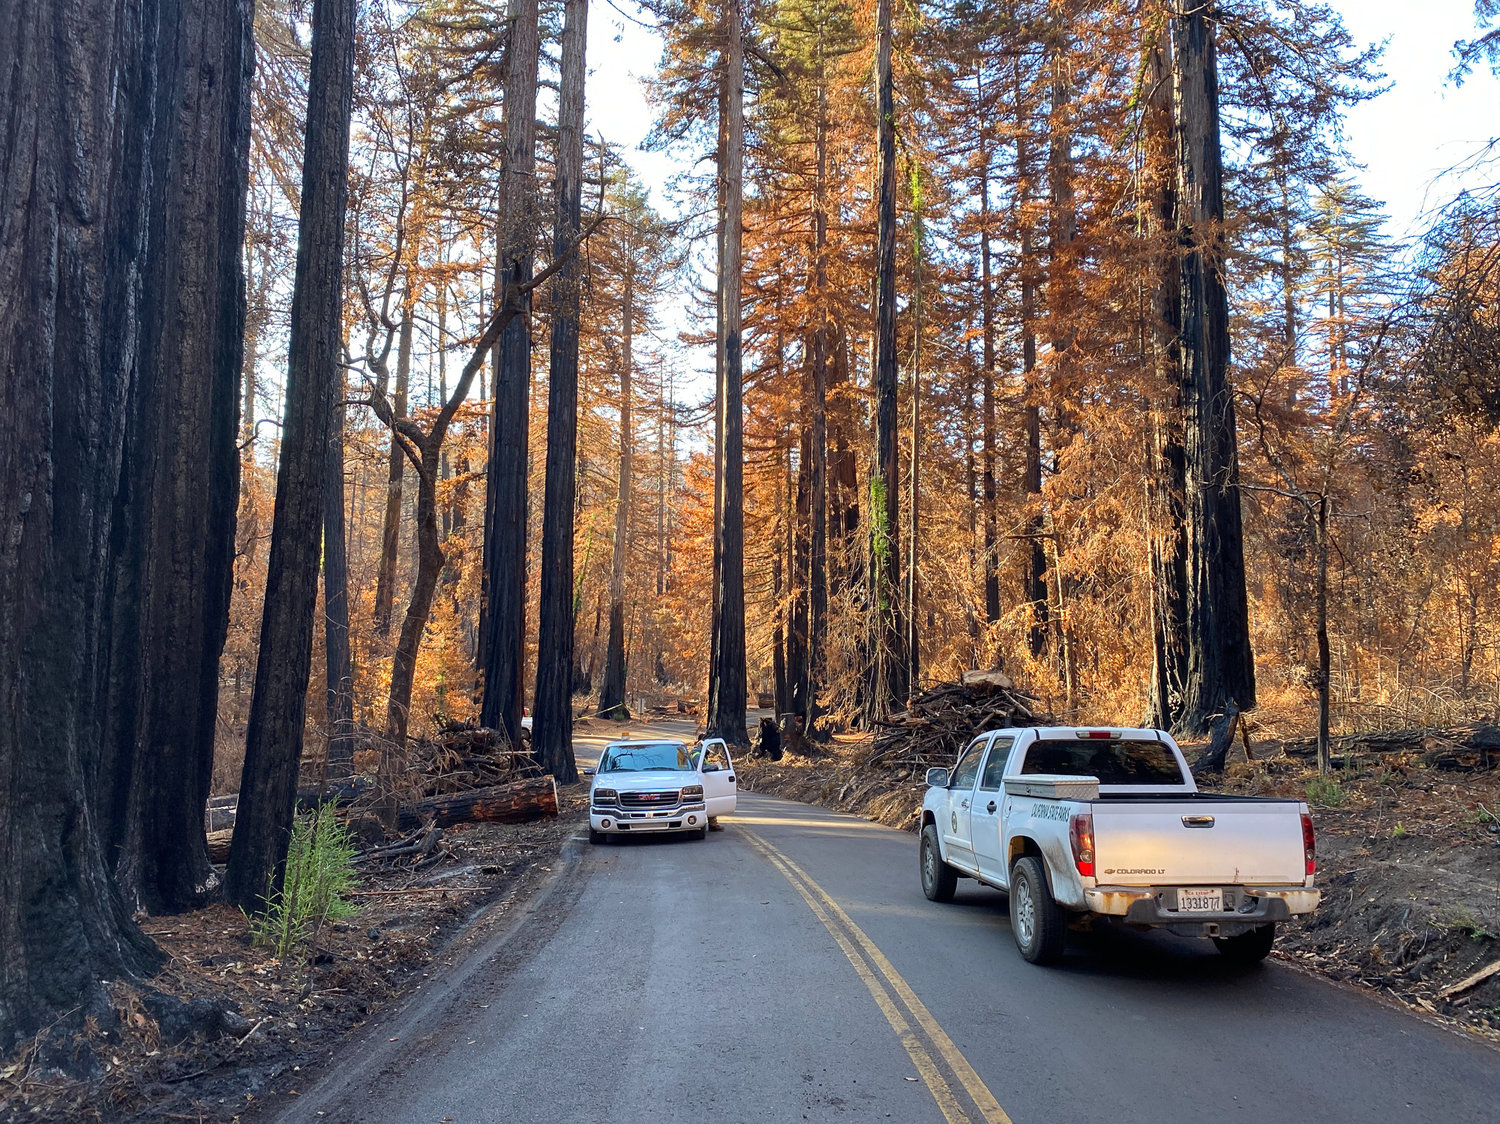 California’s ancient redwoods face new challenge from wildfires and warming climate